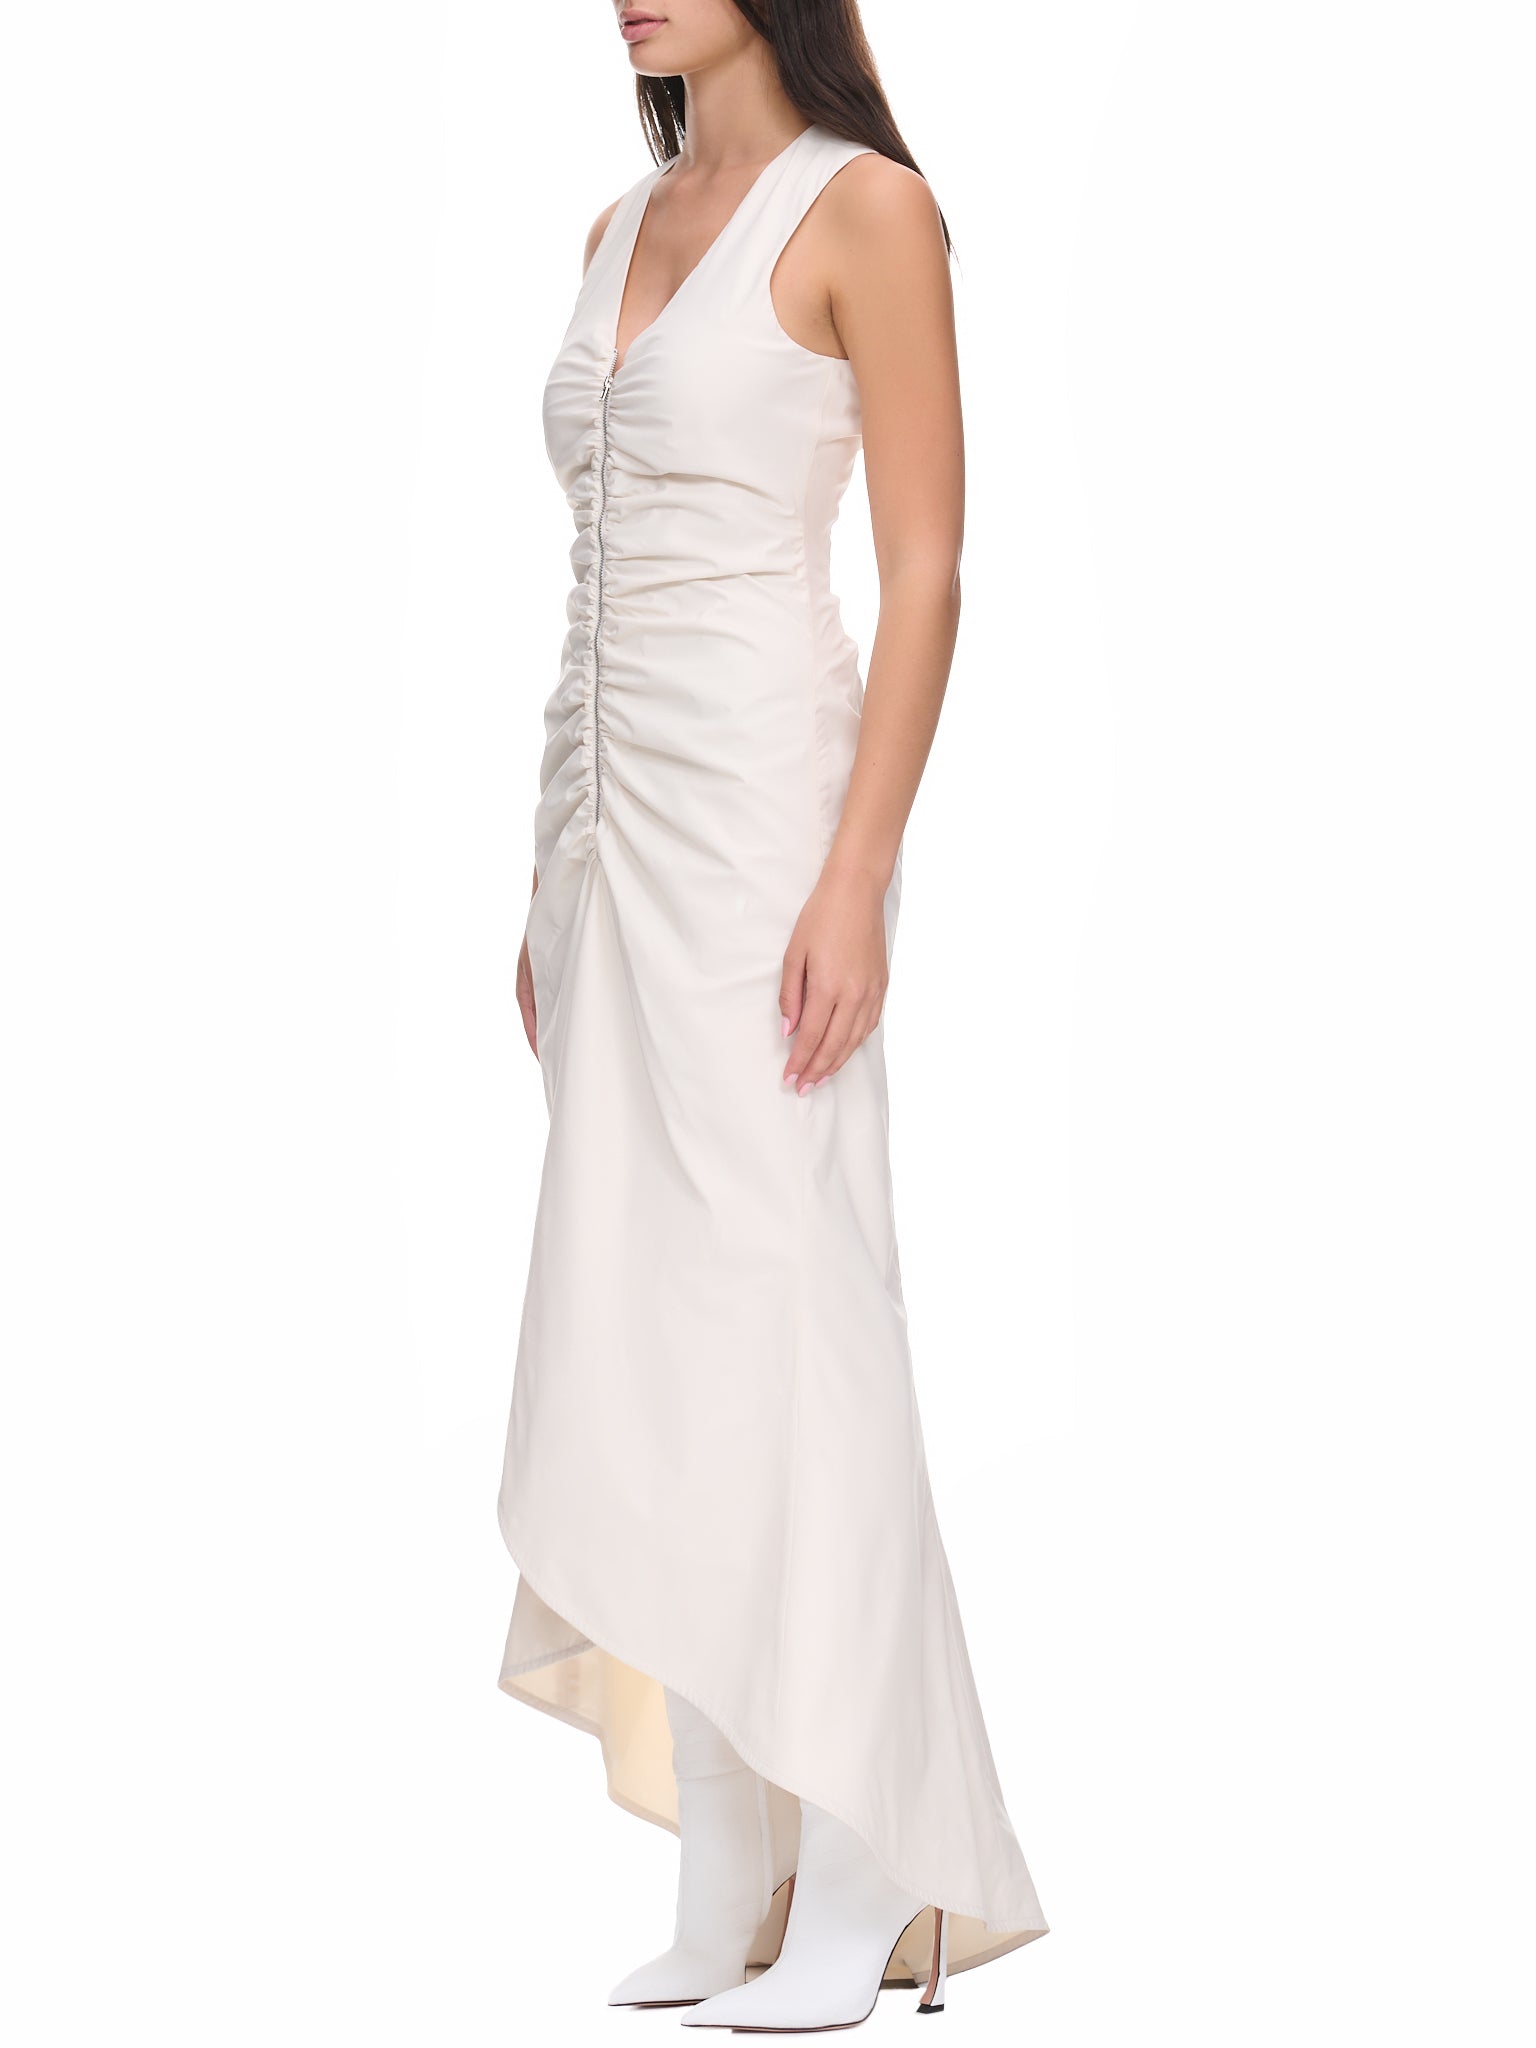 Ruched Dress (SS23D32-IVORY)